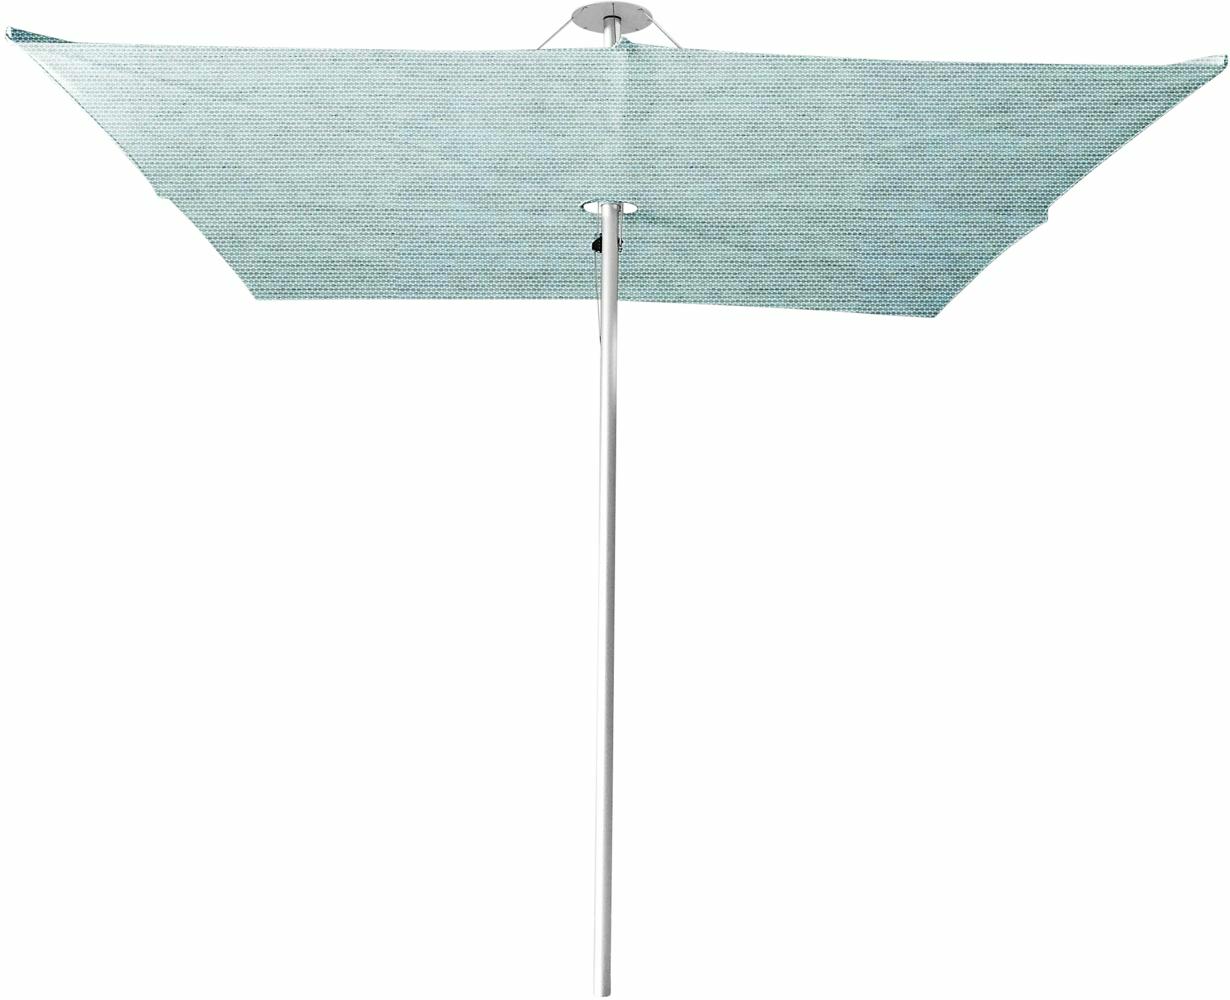 Infina center post umbrella, 3 m square, with frame in Aluminum and Solidum Curacao canopy. 